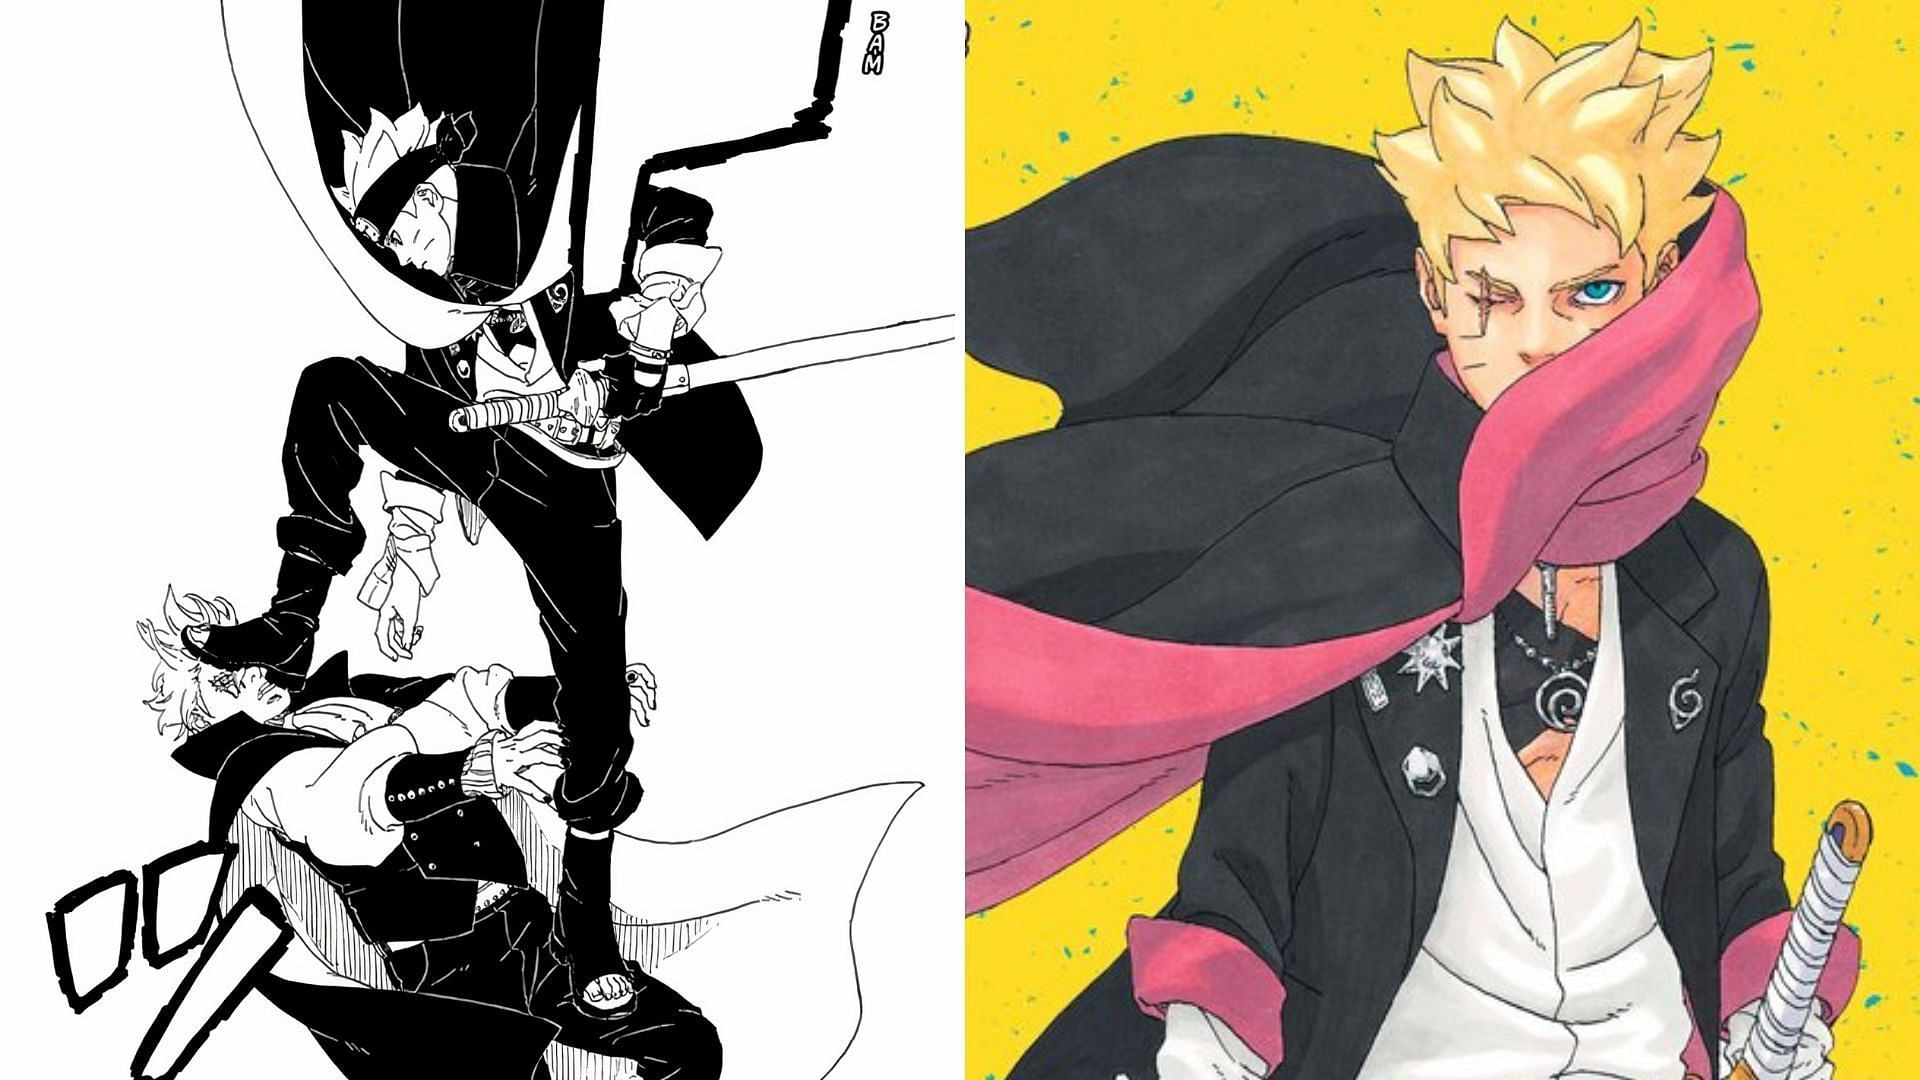 Boruto Two Blue Vortex chapter 3: Major spoilers to expect